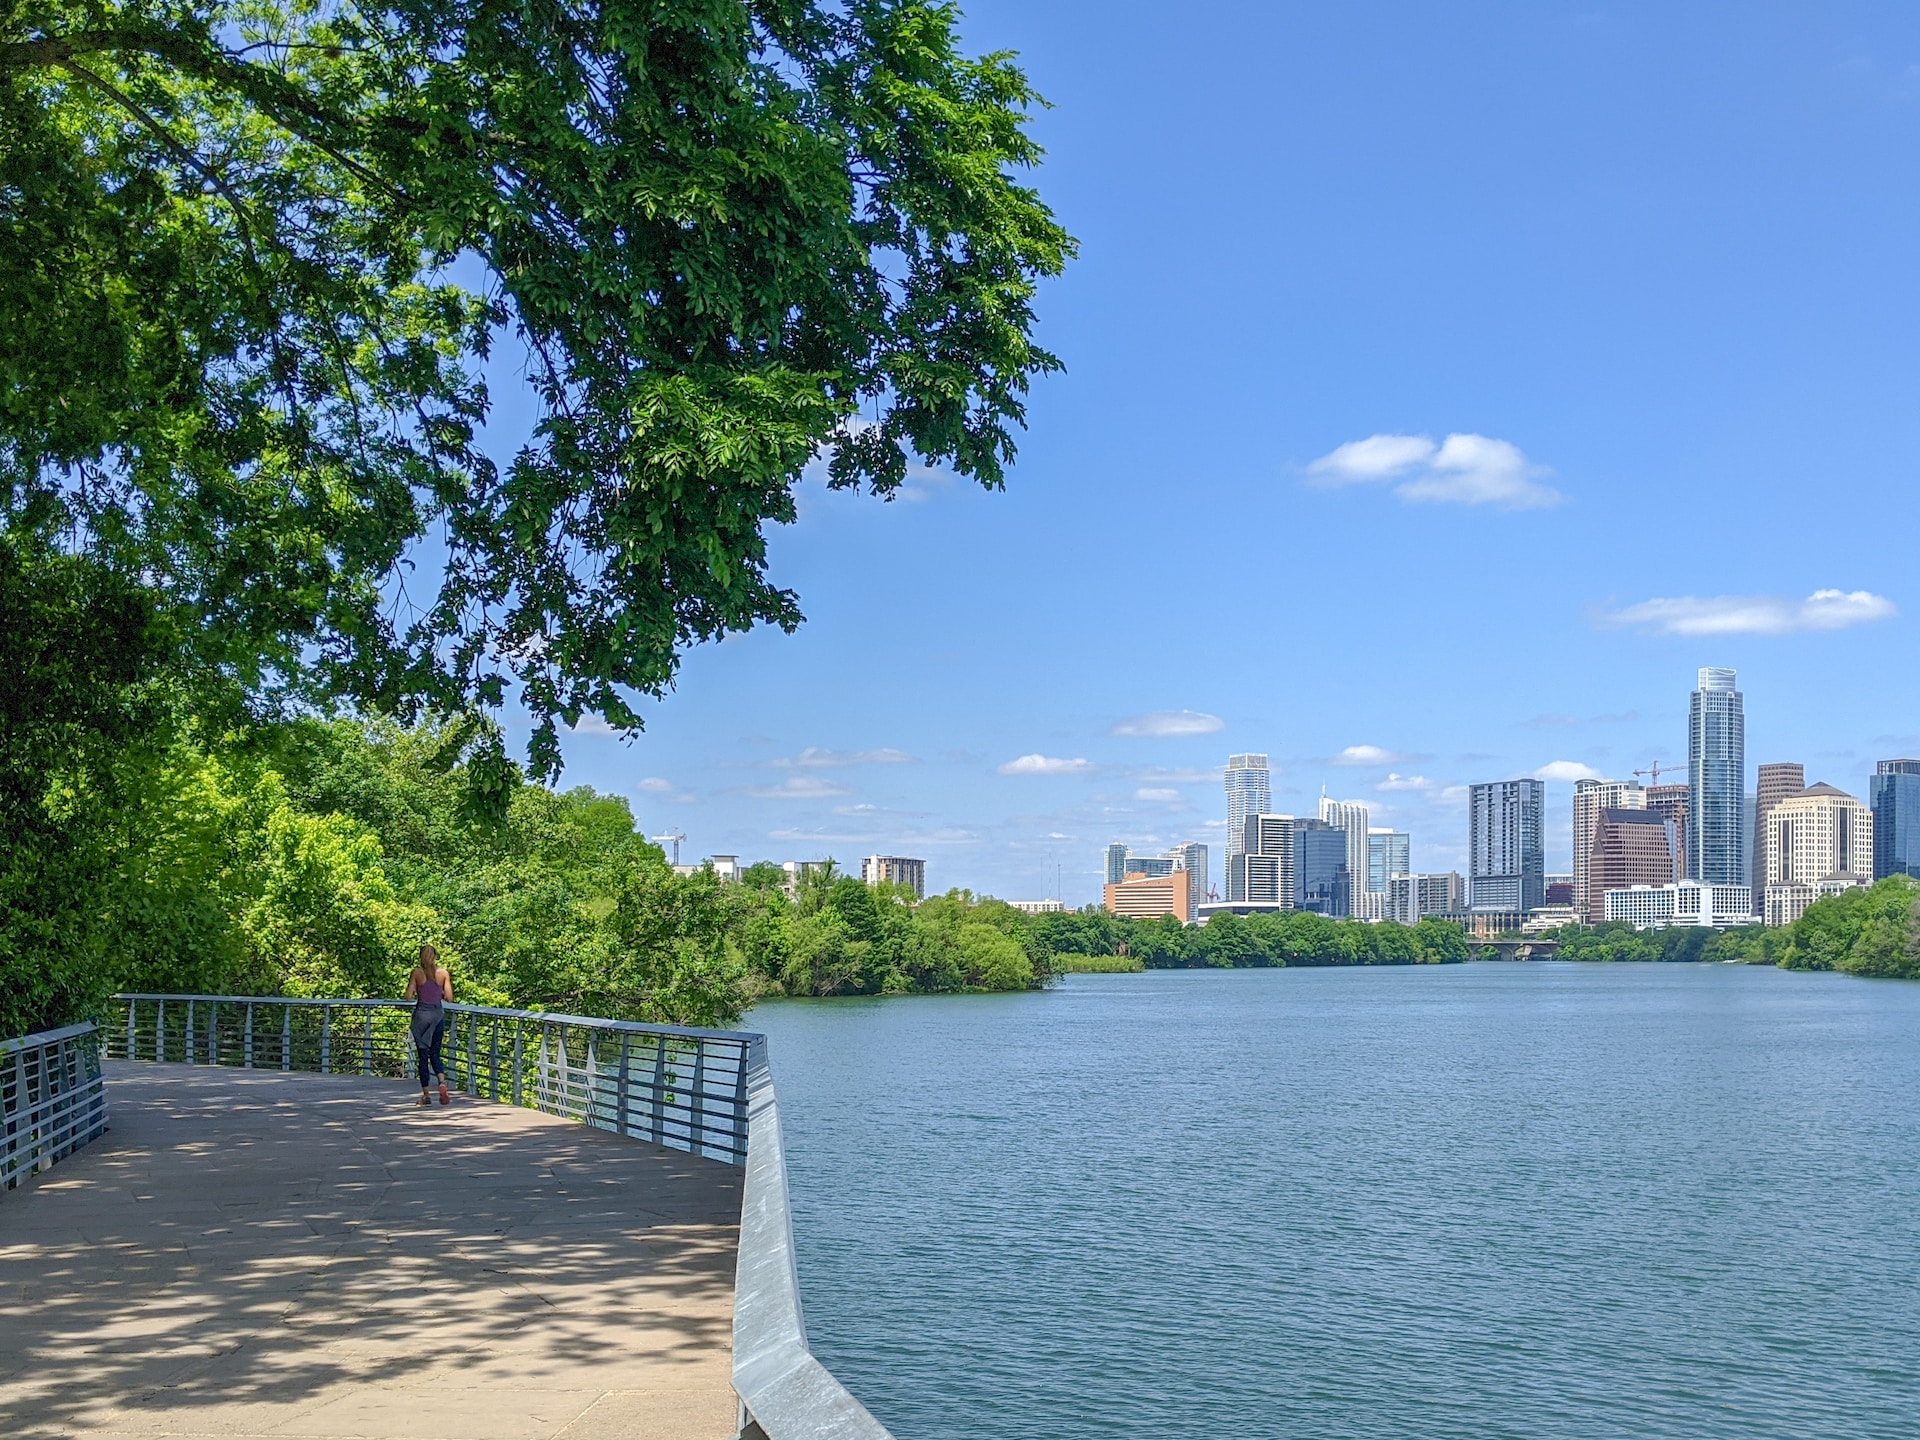 View our Austin vacation rentals